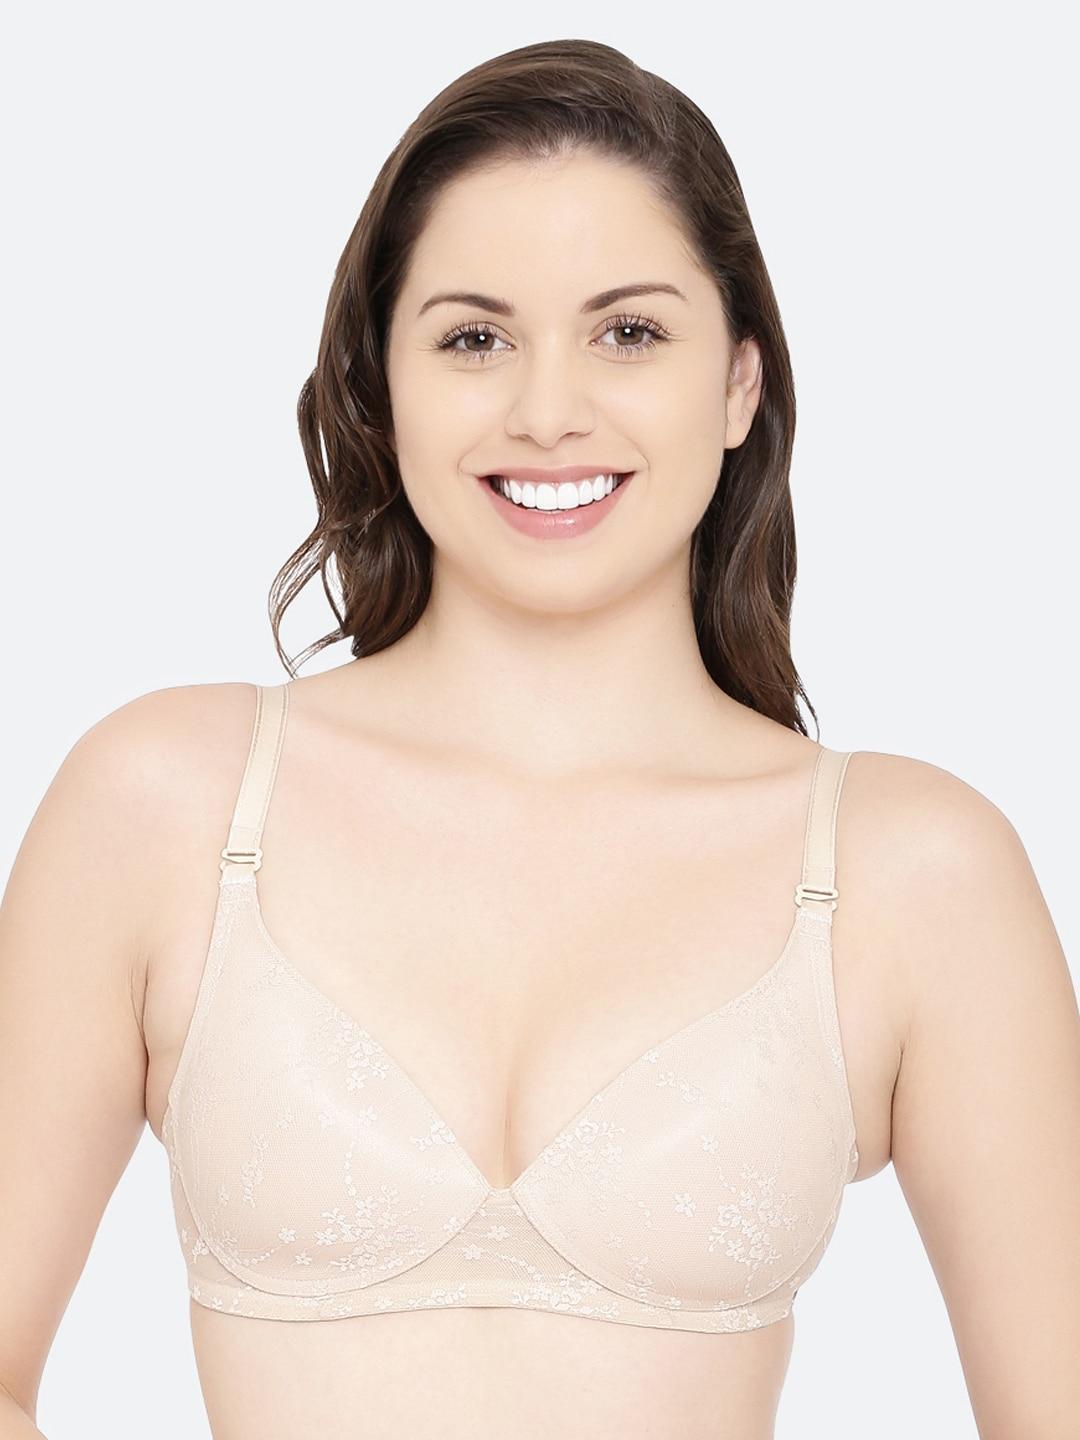 enamor-women-skinpadded-non-wired-perfect-plunge-t-shirt-bra-with-detachable-straps